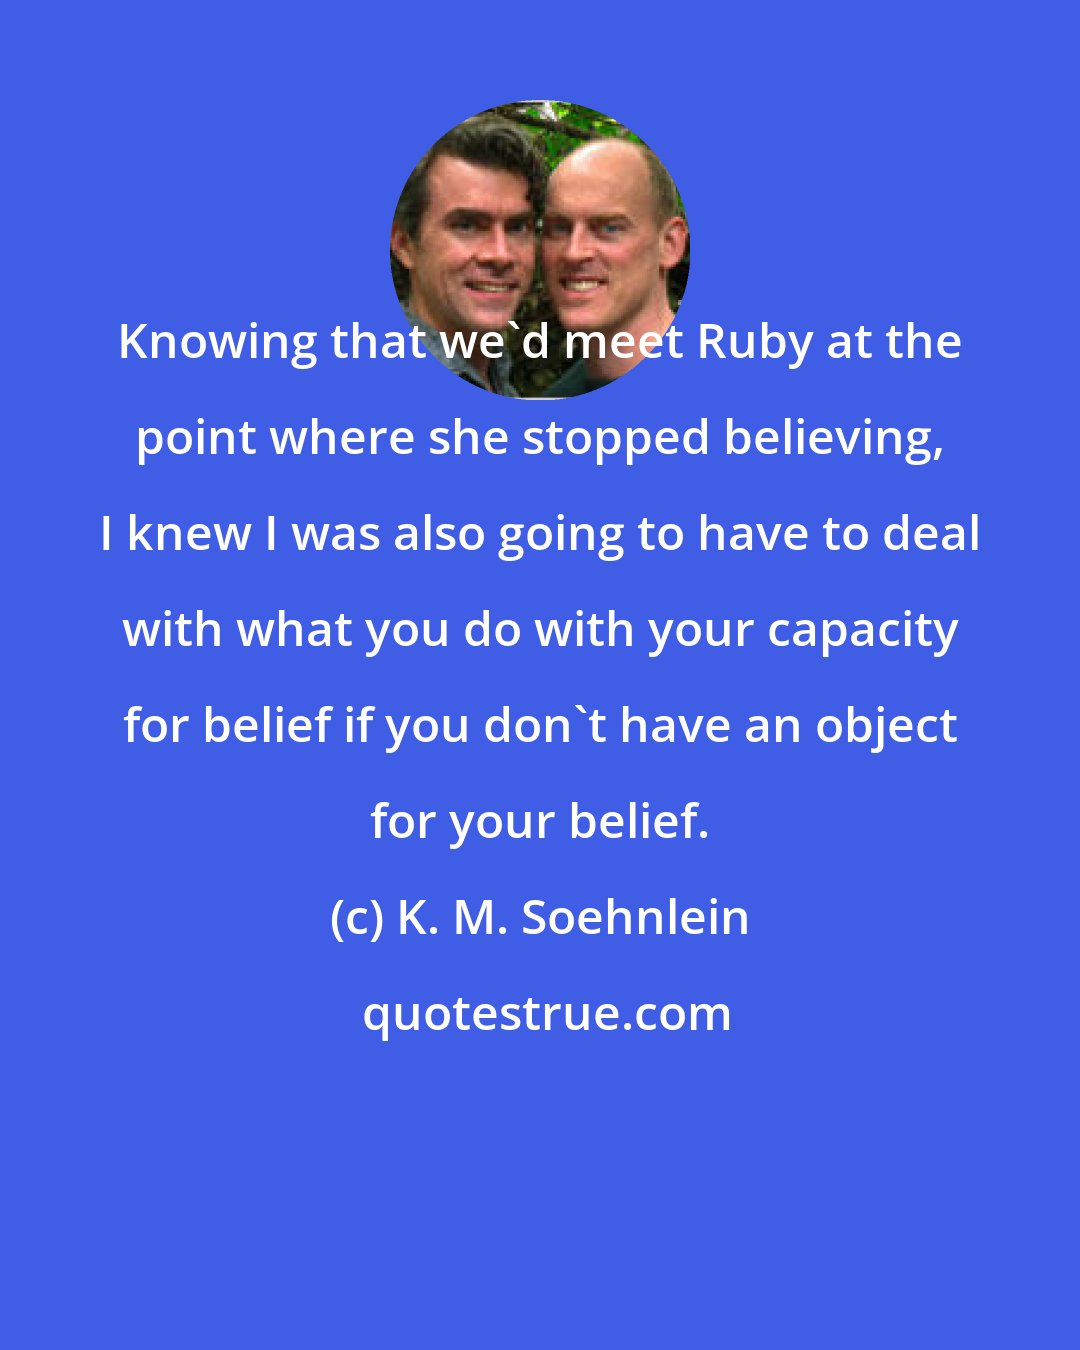 K. M. Soehnlein: Knowing that we'd meet Ruby at the point where she stopped believing, I knew I was also going to have to deal with what you do with your capacity for belief if you don't have an object for your belief.